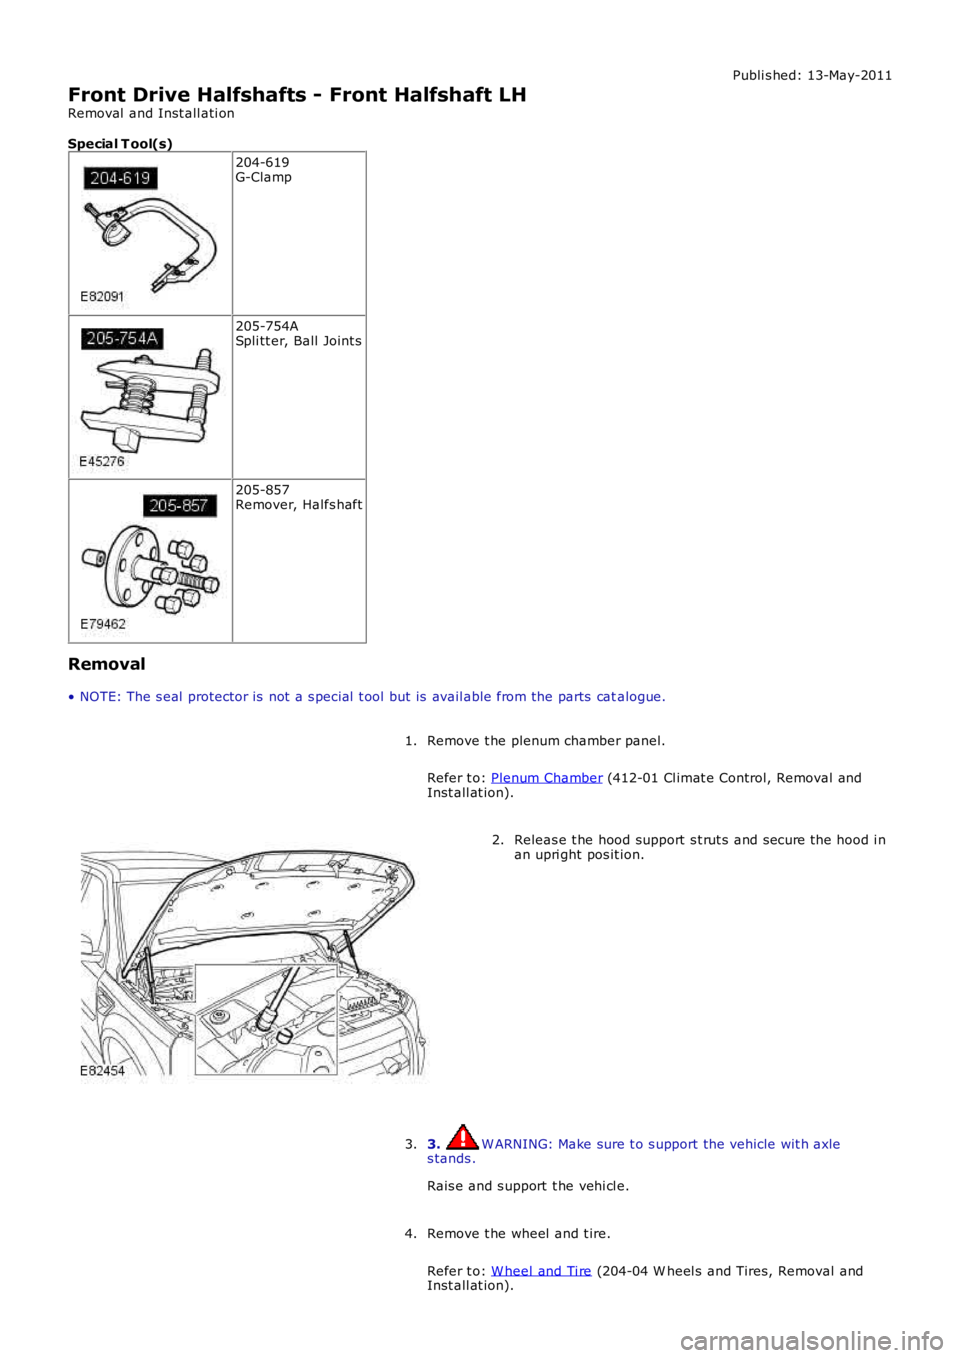 LAND ROVER FRELANDER 2 2006 Workshop Manual Publi s hed: 13-May-2011
Front Drive Halfshafts - Front Halfshaft LH
Removal  and Inst all ati on
Special T ool(s)
204-619G-Clamp
205-754ASpli tt er, Ball  Joint s
205-857Remover, Halfs haft
Removal
�